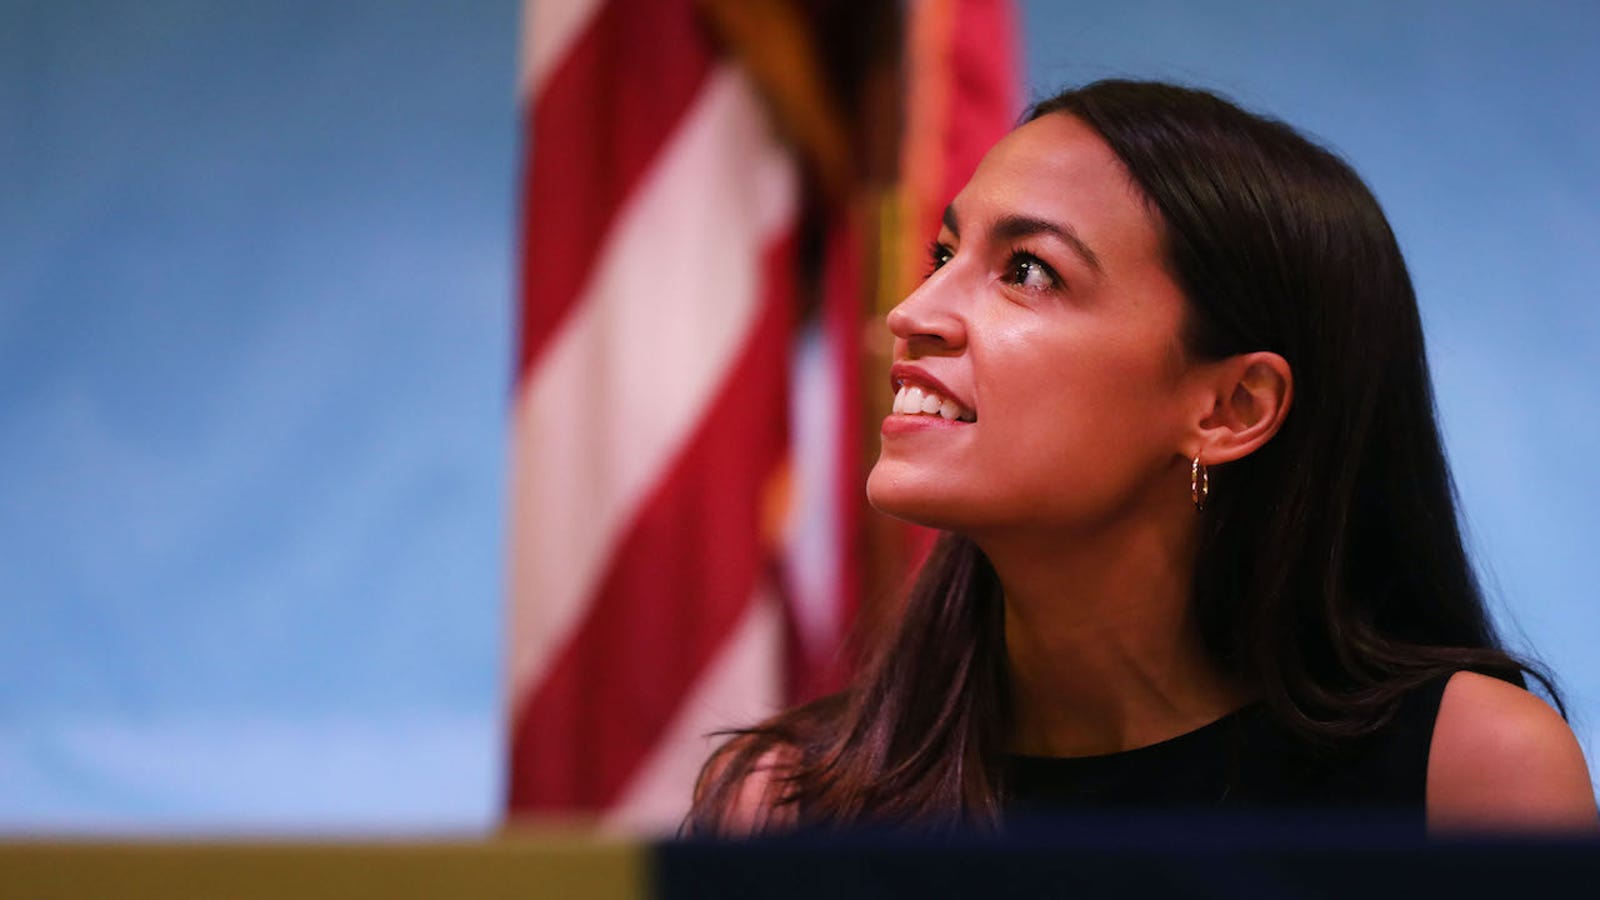 Two Cops Fired Over Facebook Post Suggesting Rep Ocasio Cortez Should